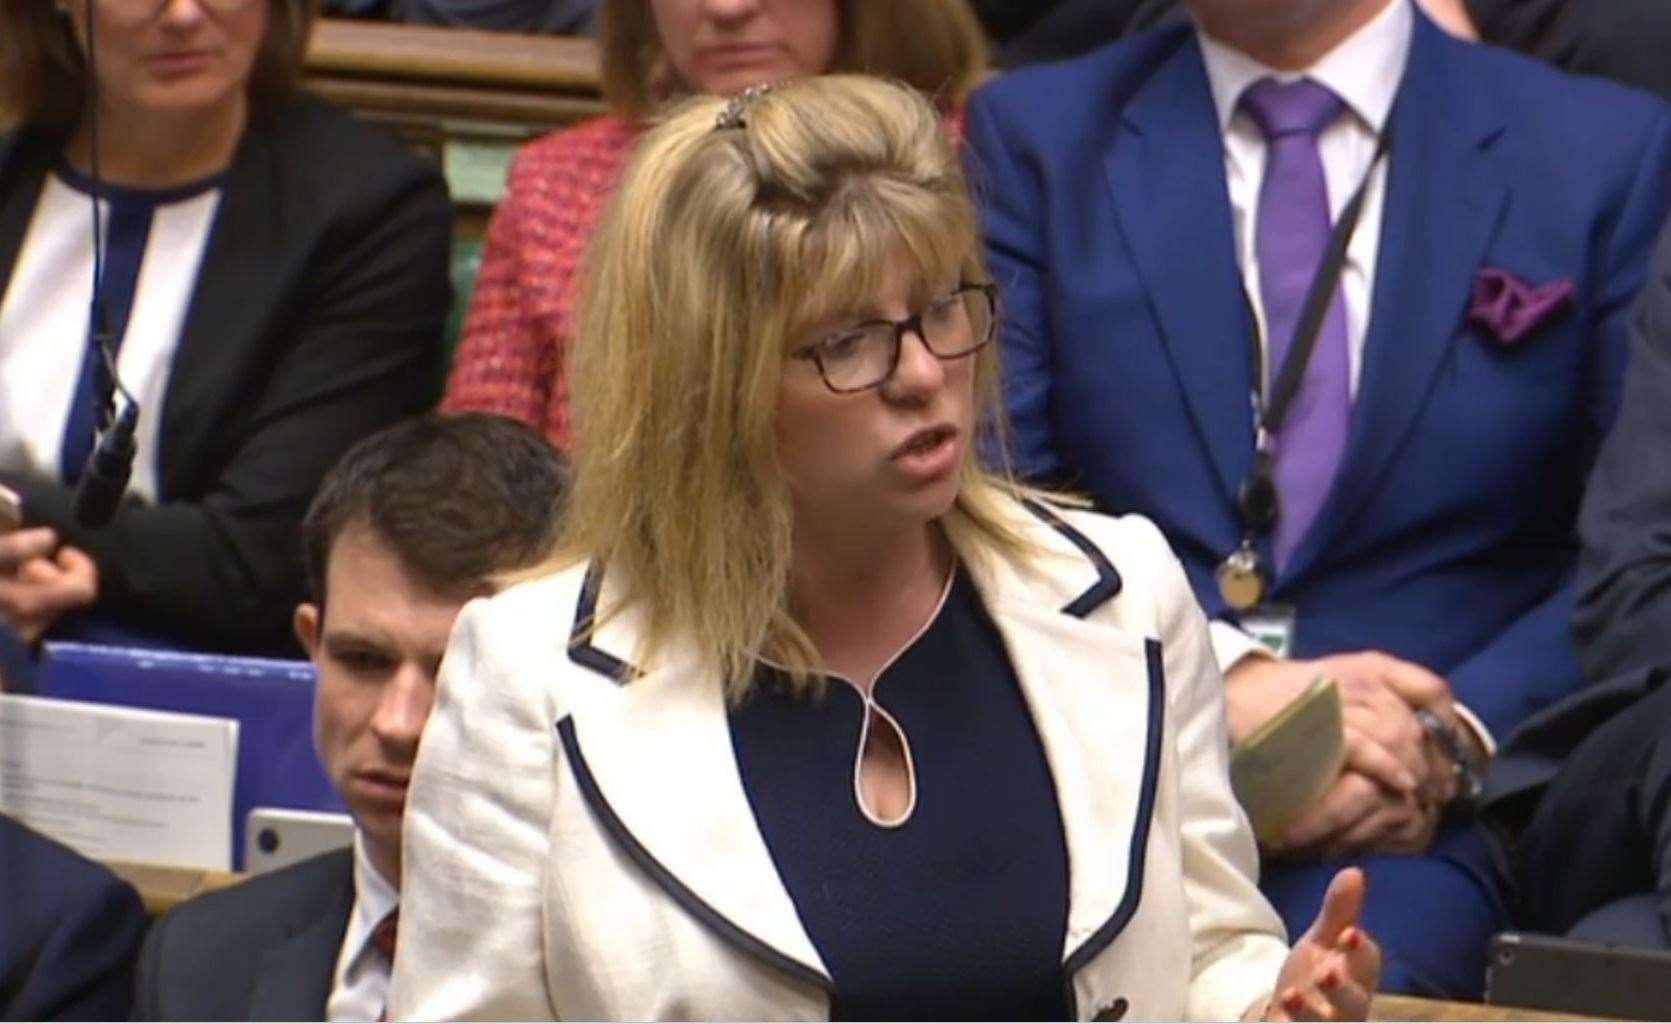 Maria Caulfield said parliamentary time does not allow surrogacy law changes to be taken forward ‘at the moment’ (PA)